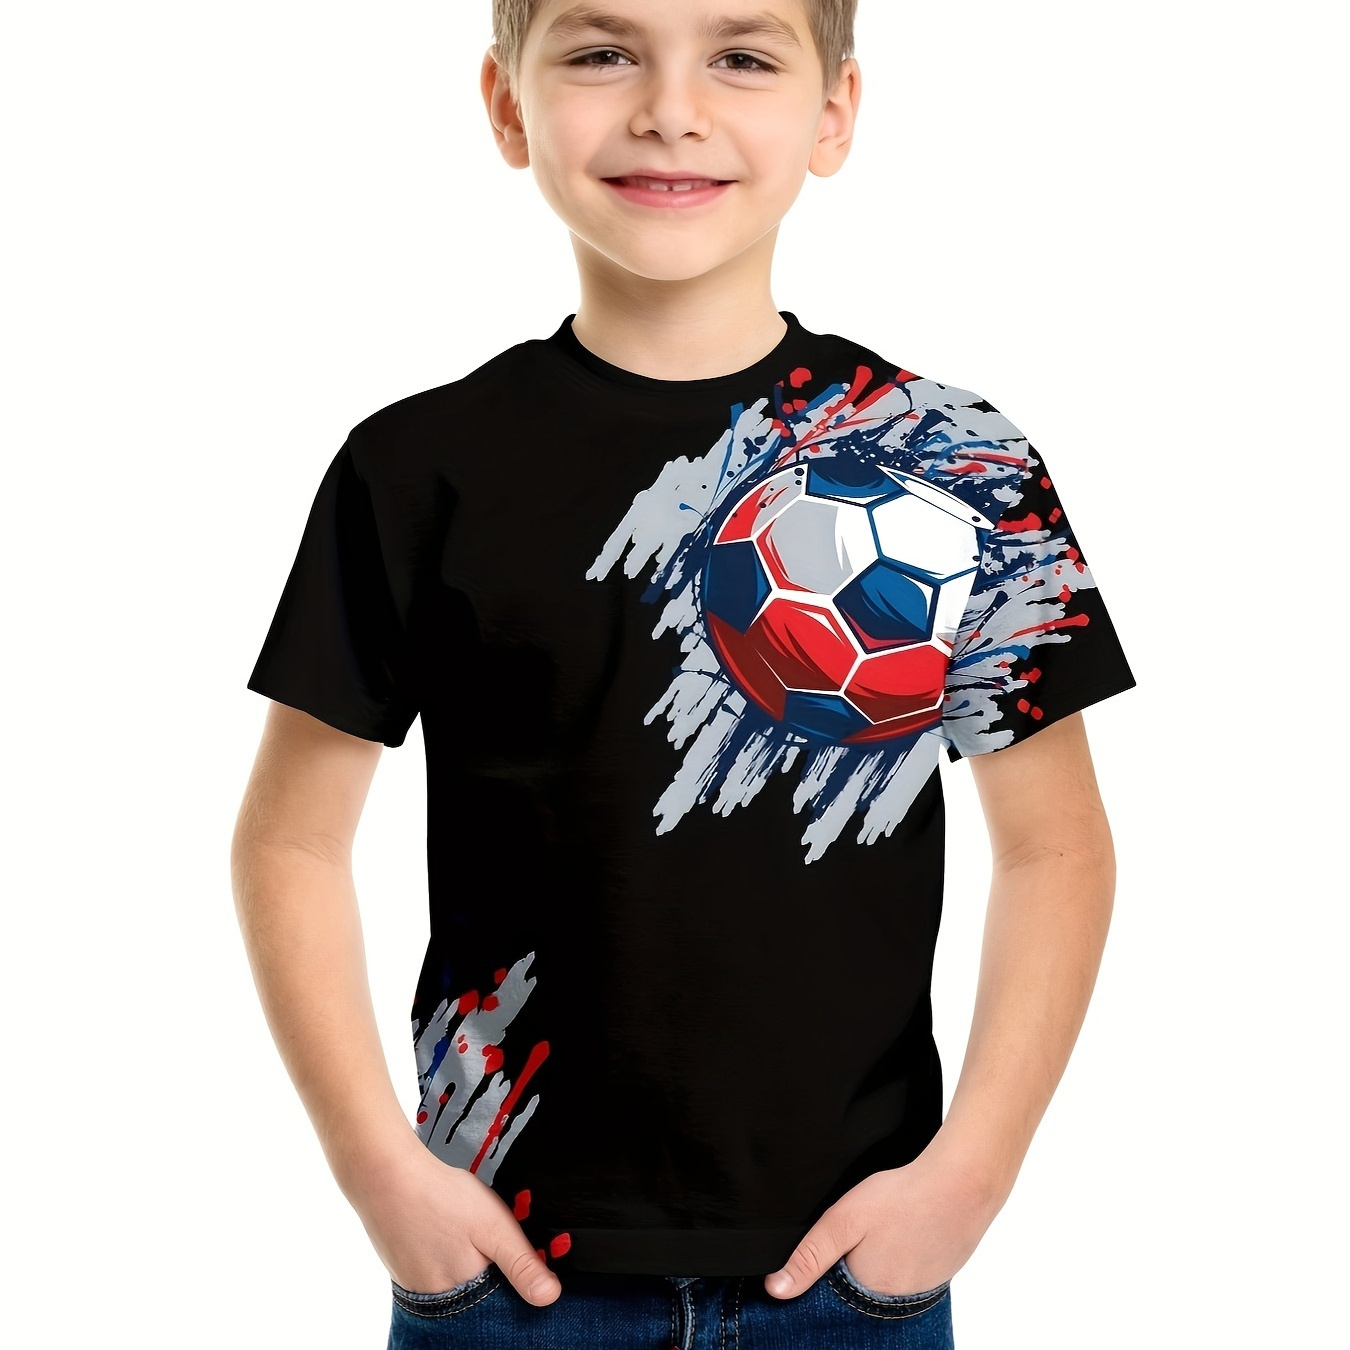 

Trendy Football Graphic 3d Print Short Sleeve T-shirt, Casual Trendy Round Neck Comfy Summer Tops, Boy's Clothing